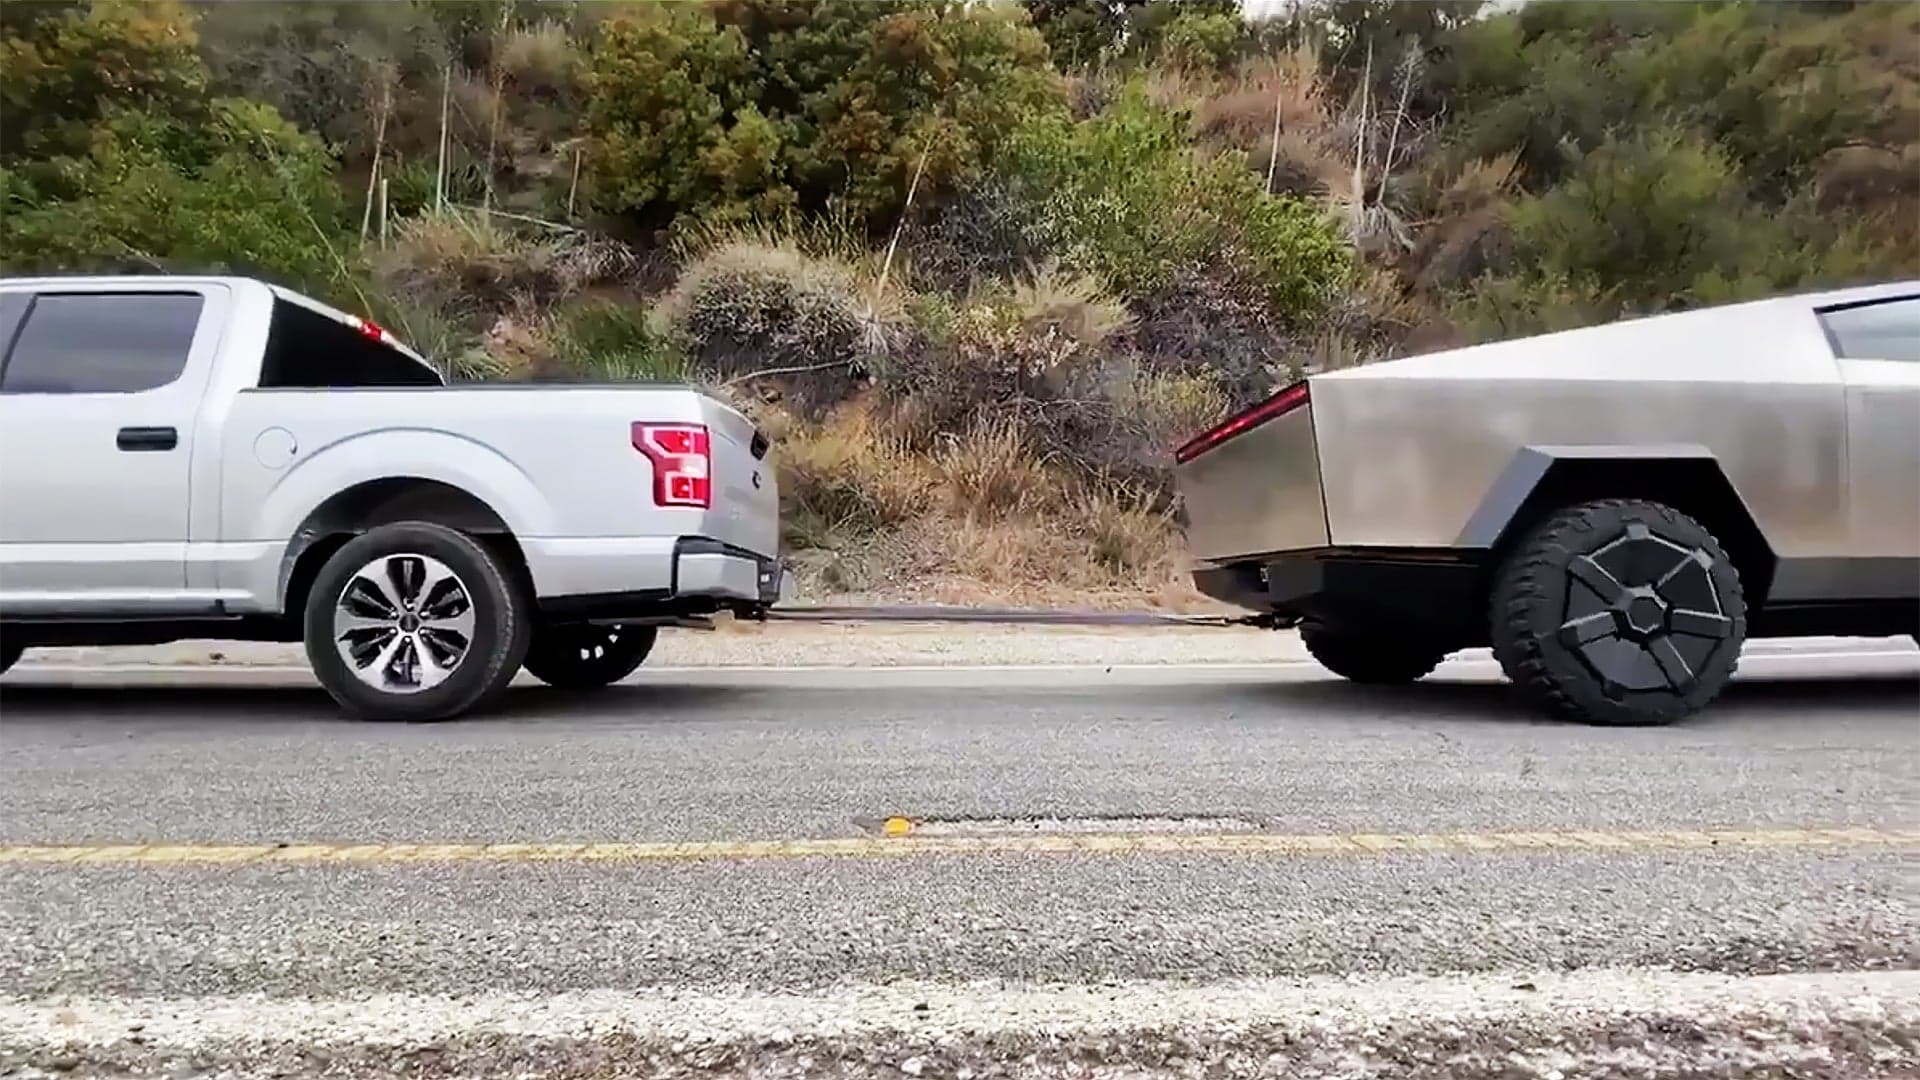 Elon Musk Accepts Ford’s Challenge to Tesla Cybertruck vs. F-150 Tug-of-War Rematch